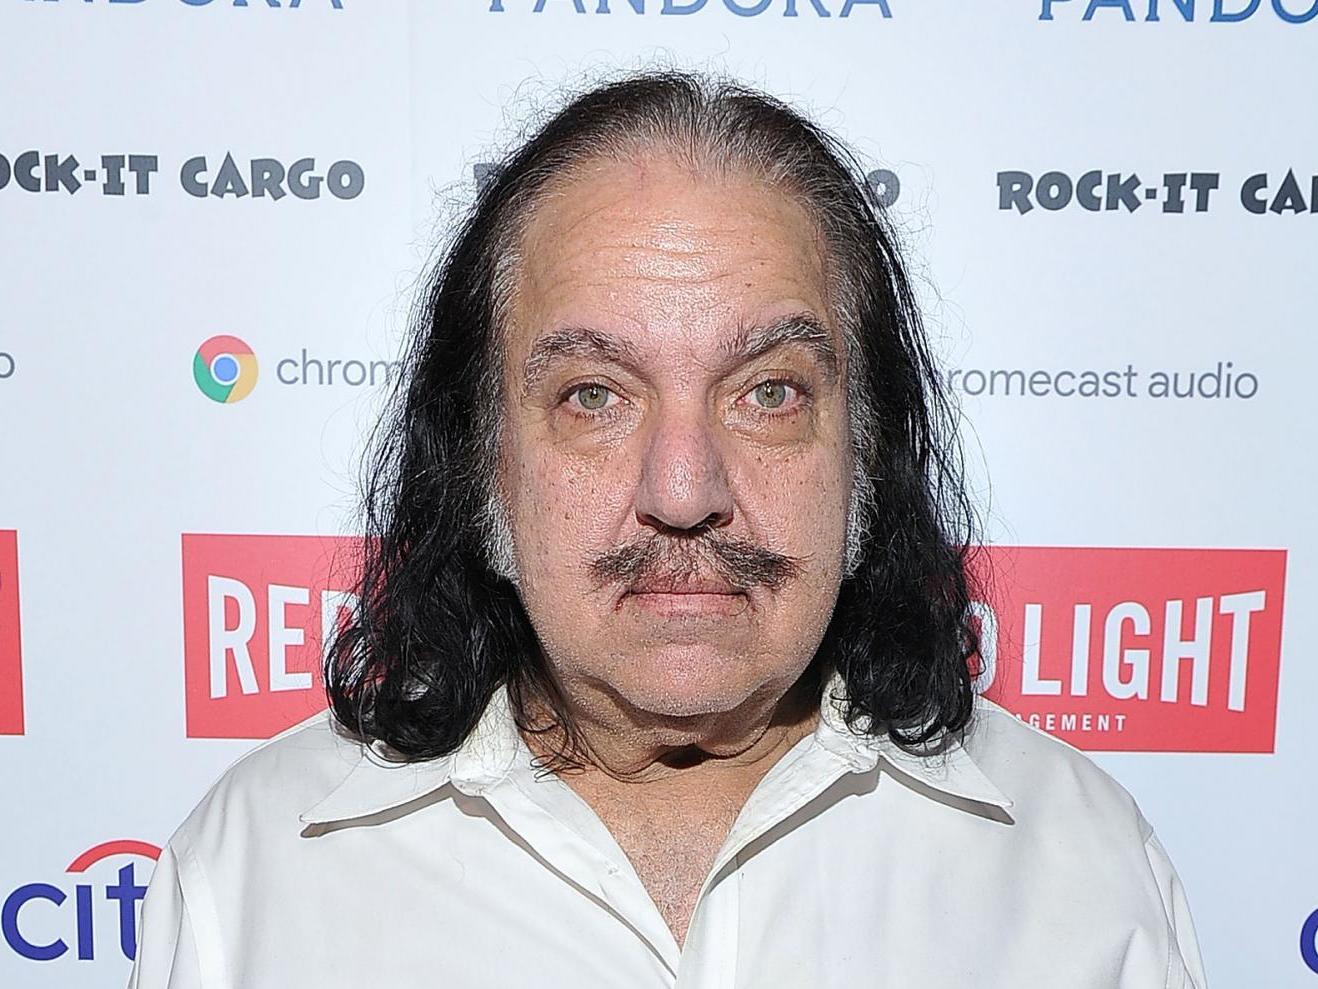 Ron Jeremy Porn star charged with raping three women and sexually assaulting another The Independent The Independent photo